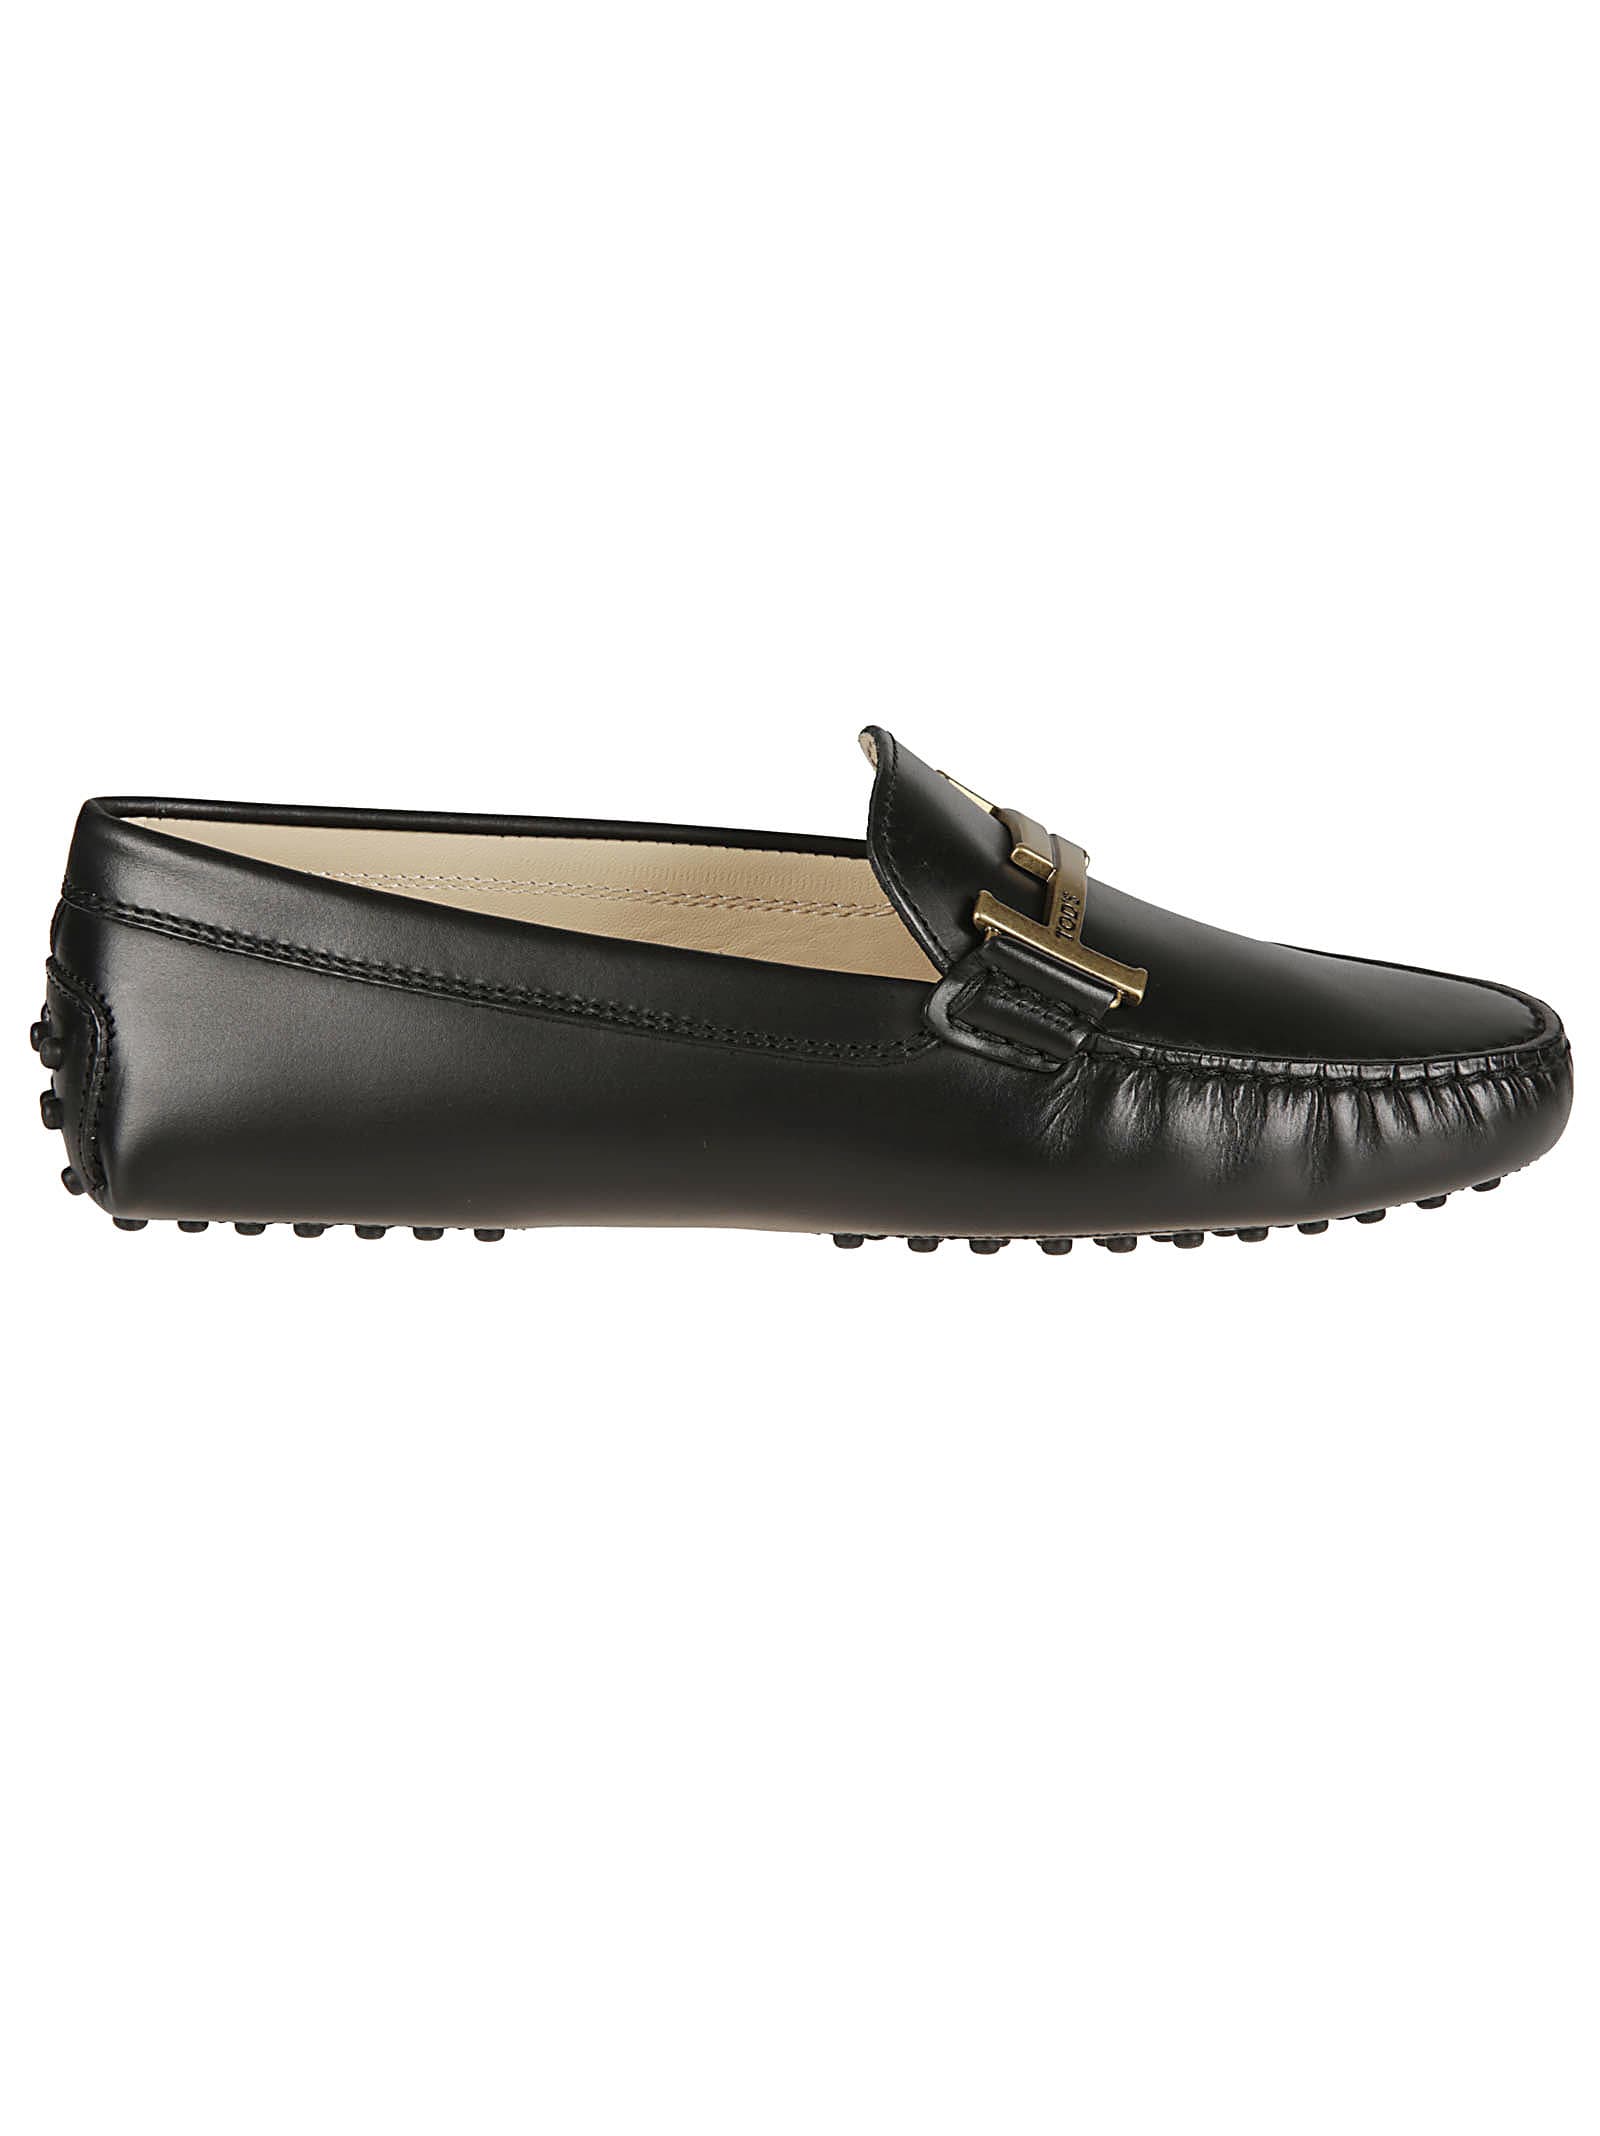 Buy Tods Double T Engraved Logo Classic Loafers online, shop Tods shoes with free shipping